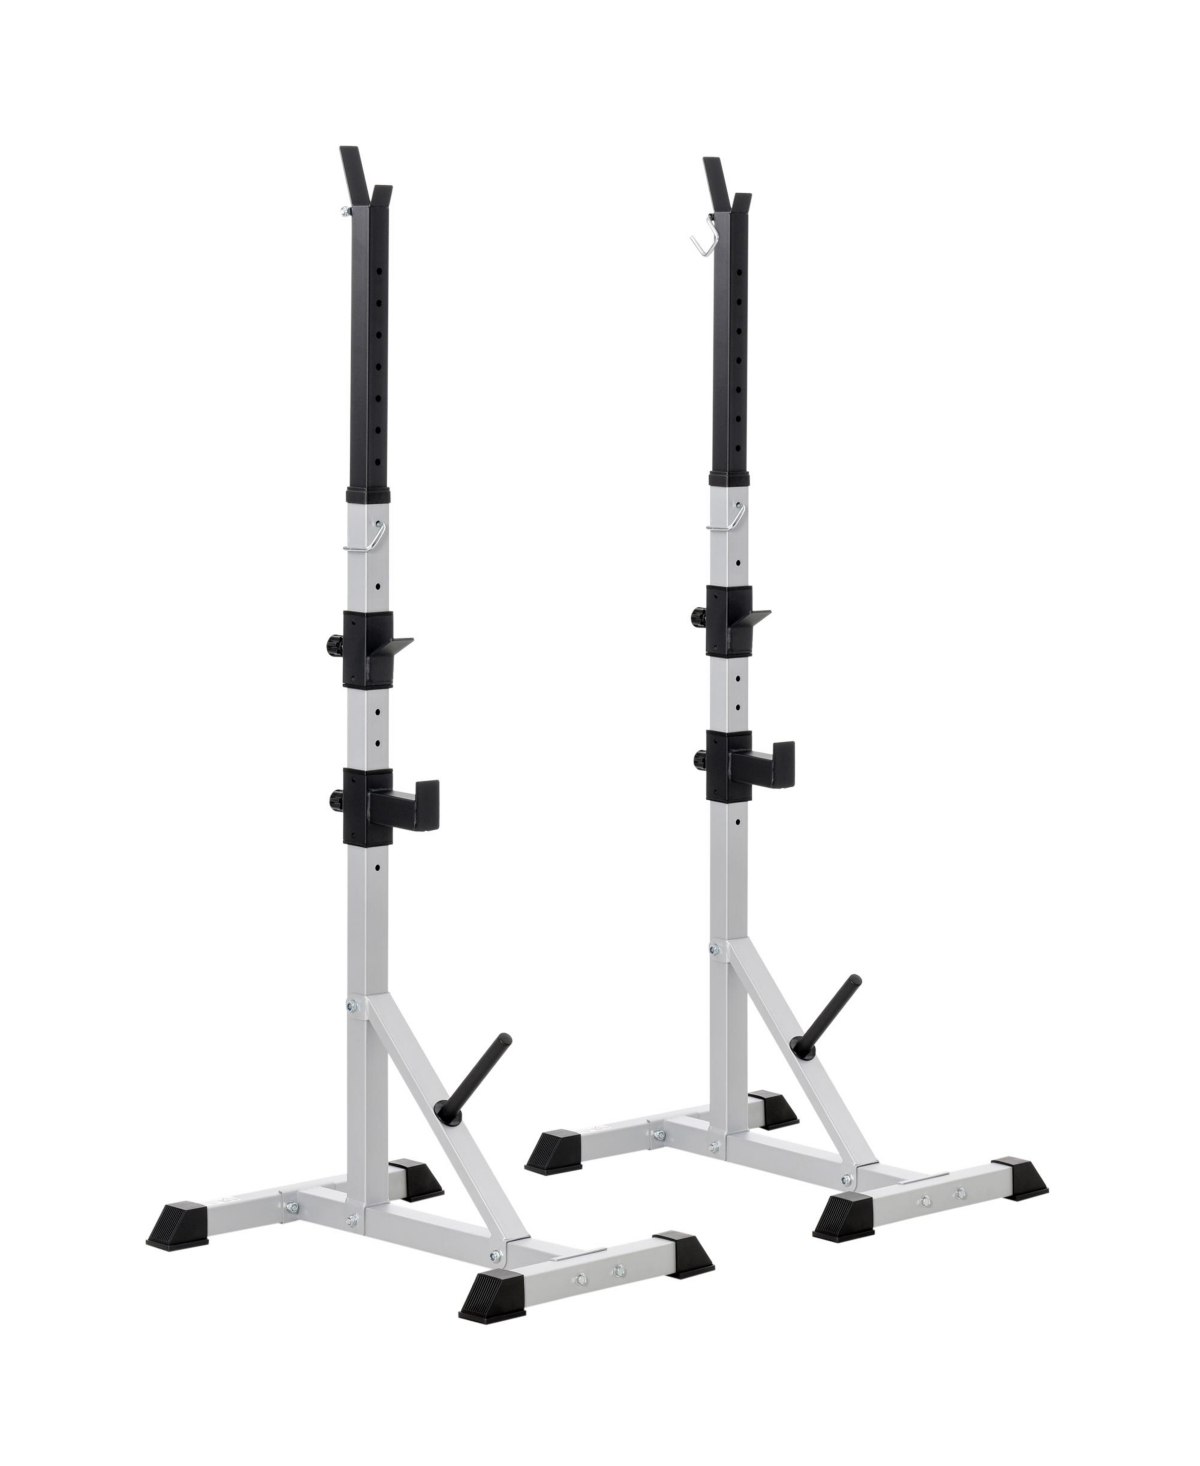 2-Piece Steel Height Adjustable Barbell Squat Rack and Bench Press - Silver